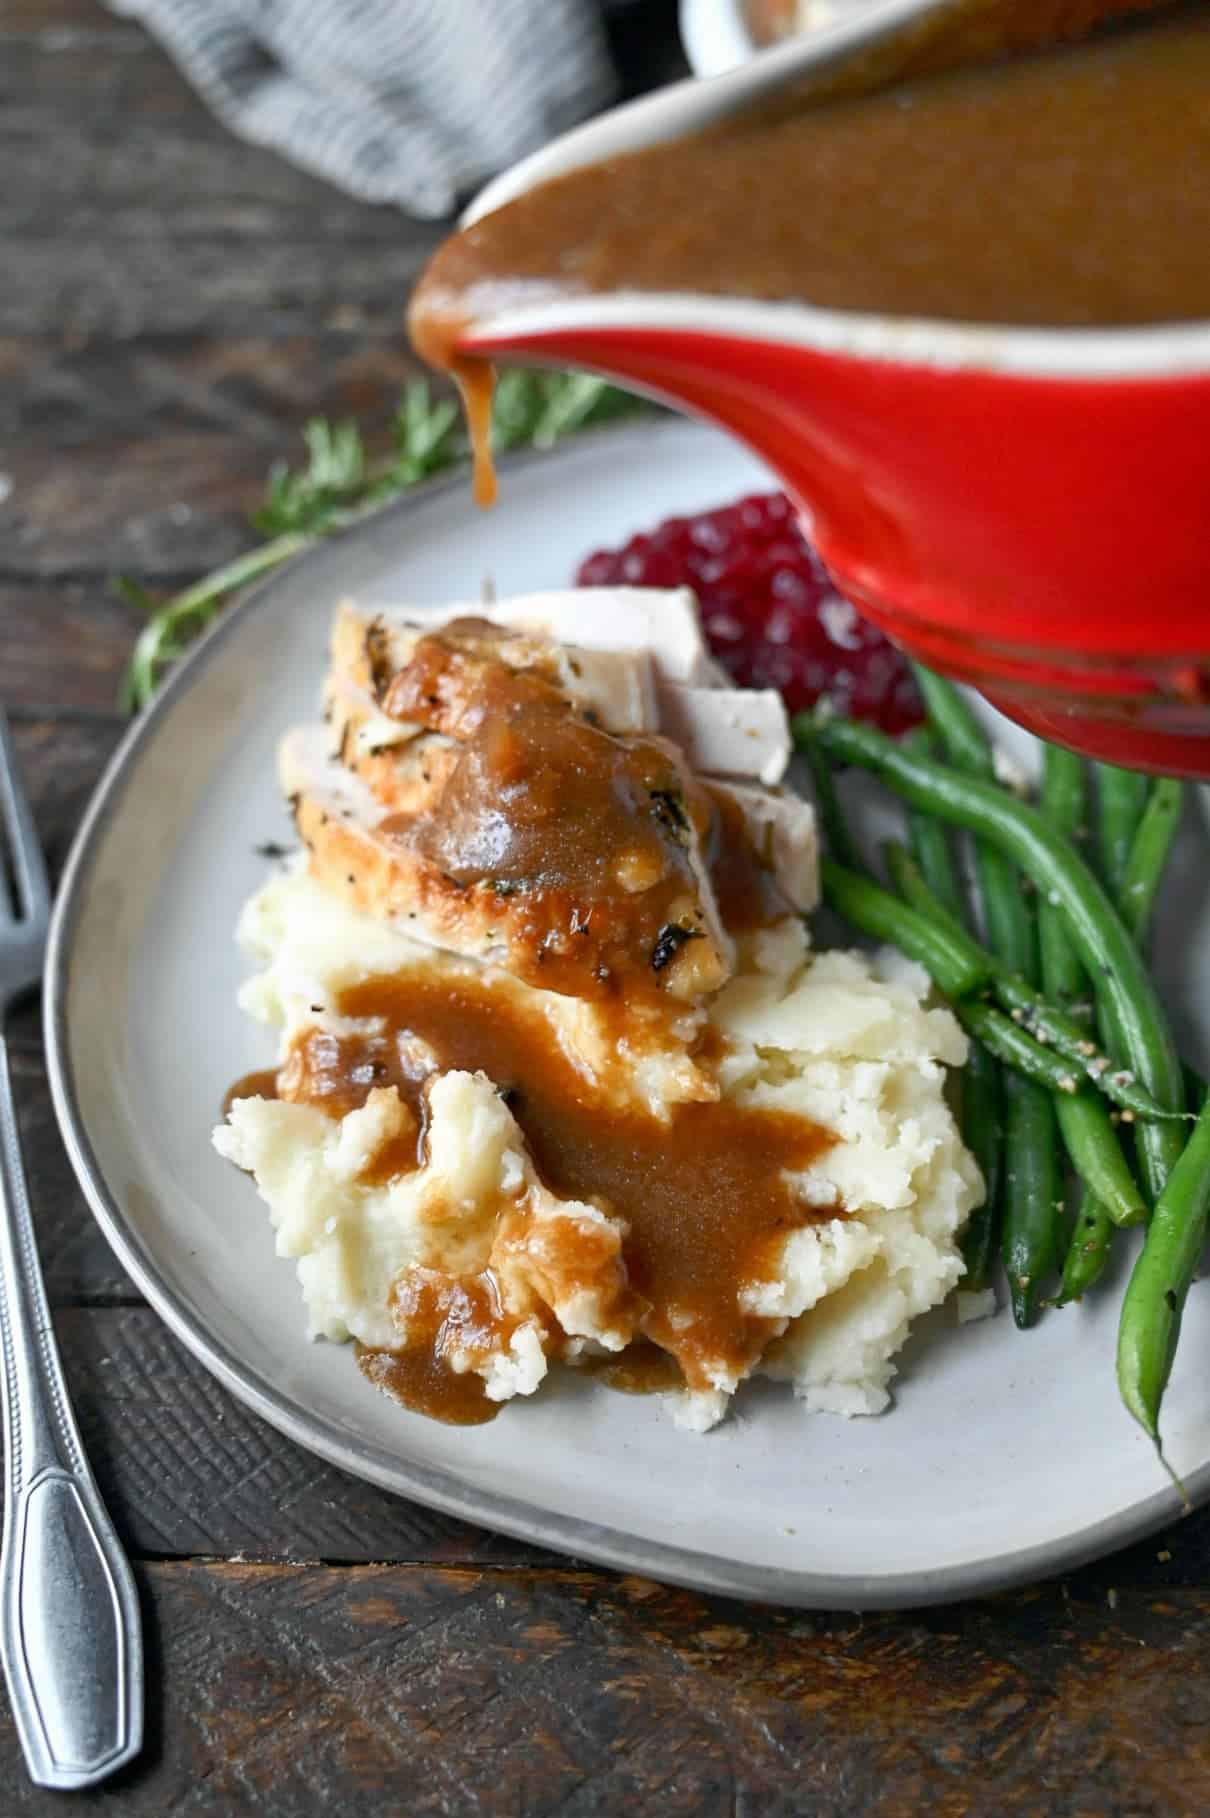 Turkey gravy being poured out of a red gravy boat on top of mashed potatoes and turkey.